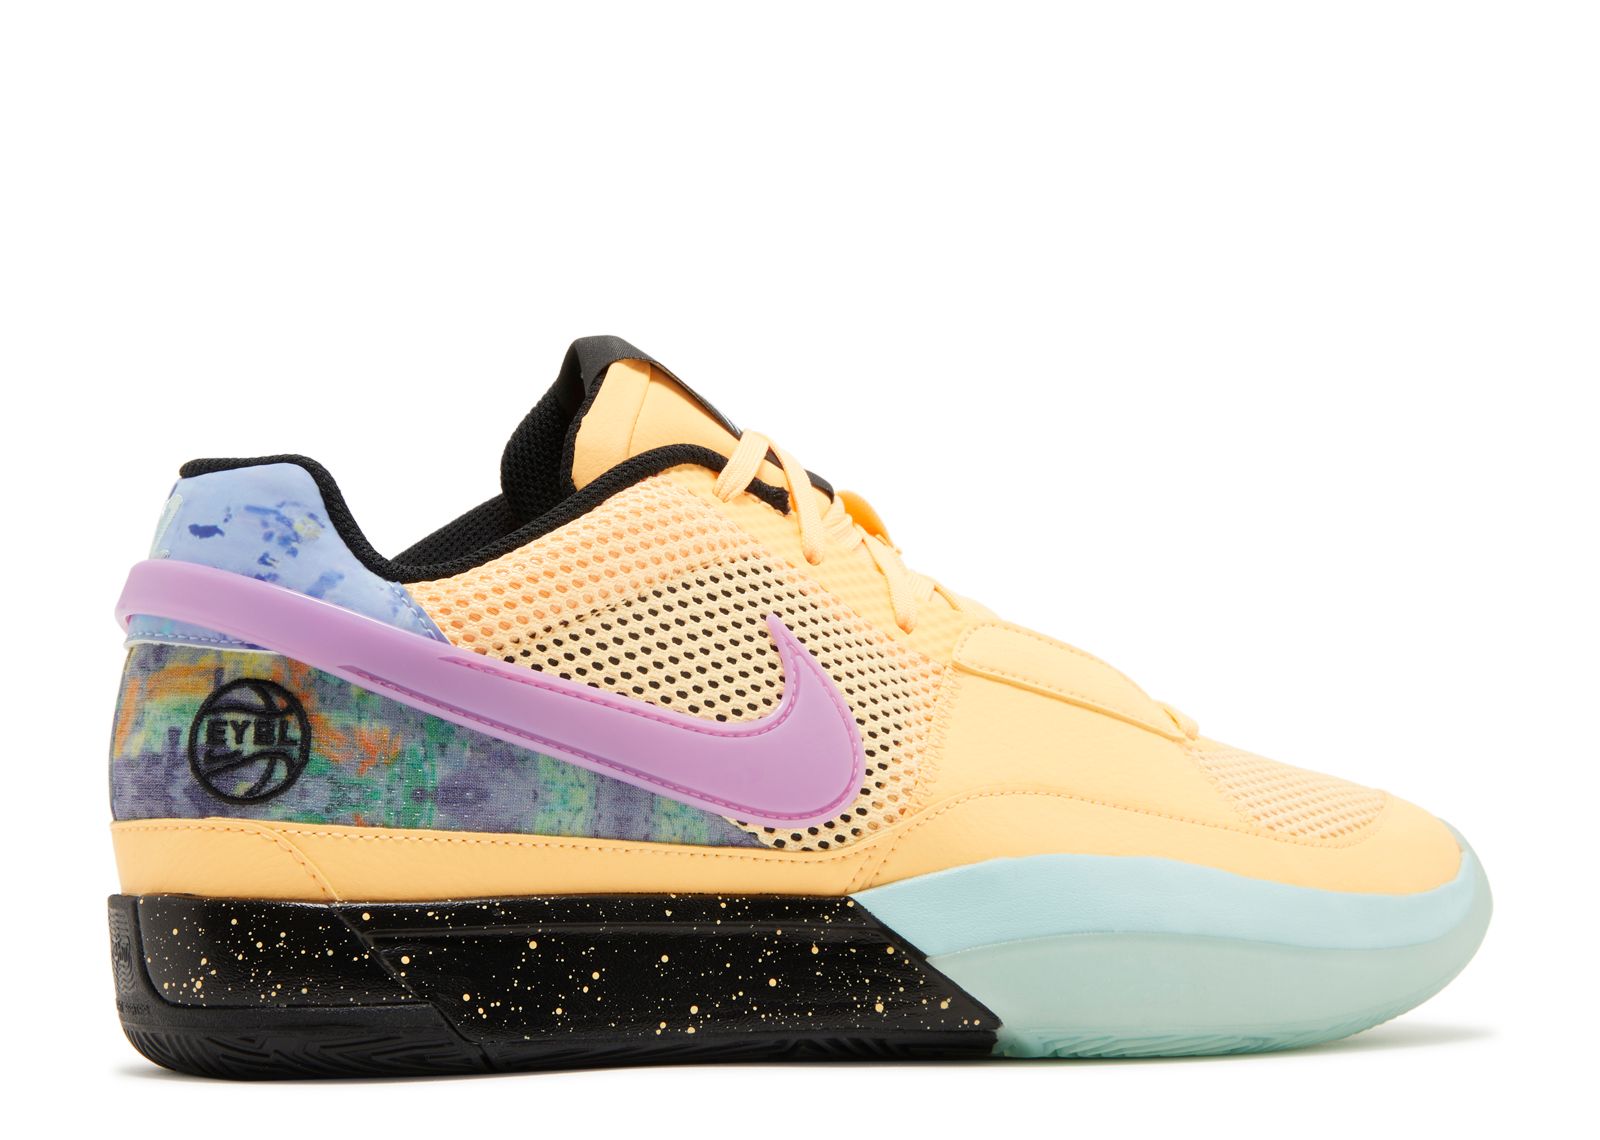 The Nike Ja 1 EYBL Launches This Fall - Sneaker News